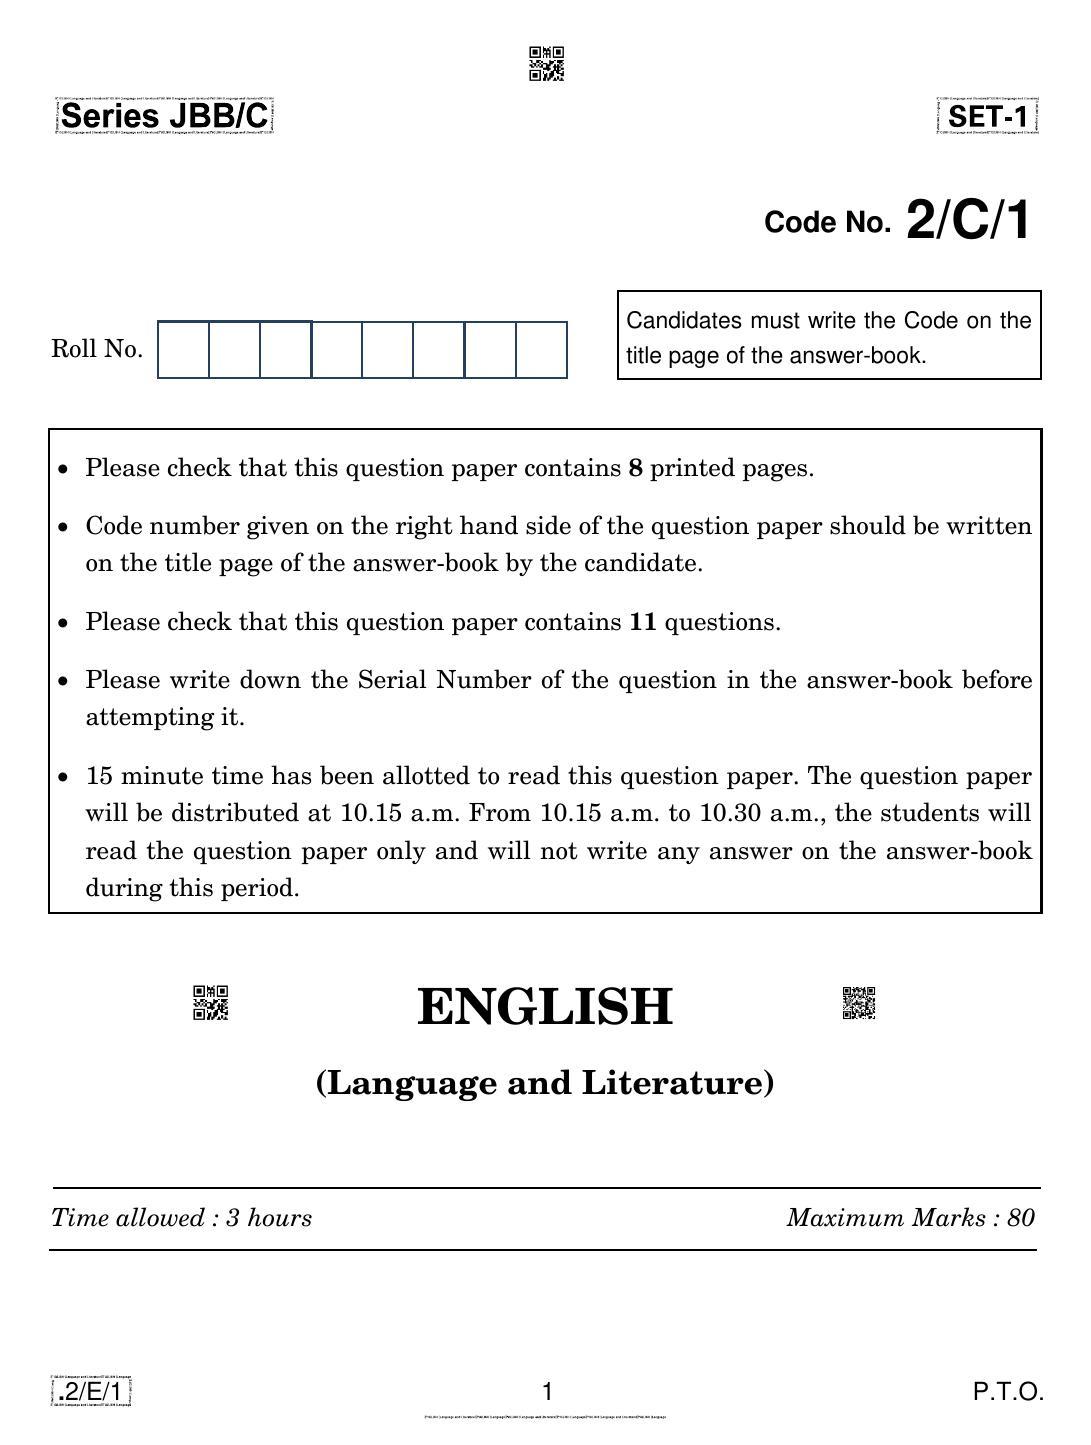 CBSE Class 10 2-C-1 Eng Lang. And Literature 2020 Compartment Question Paper - Page 1